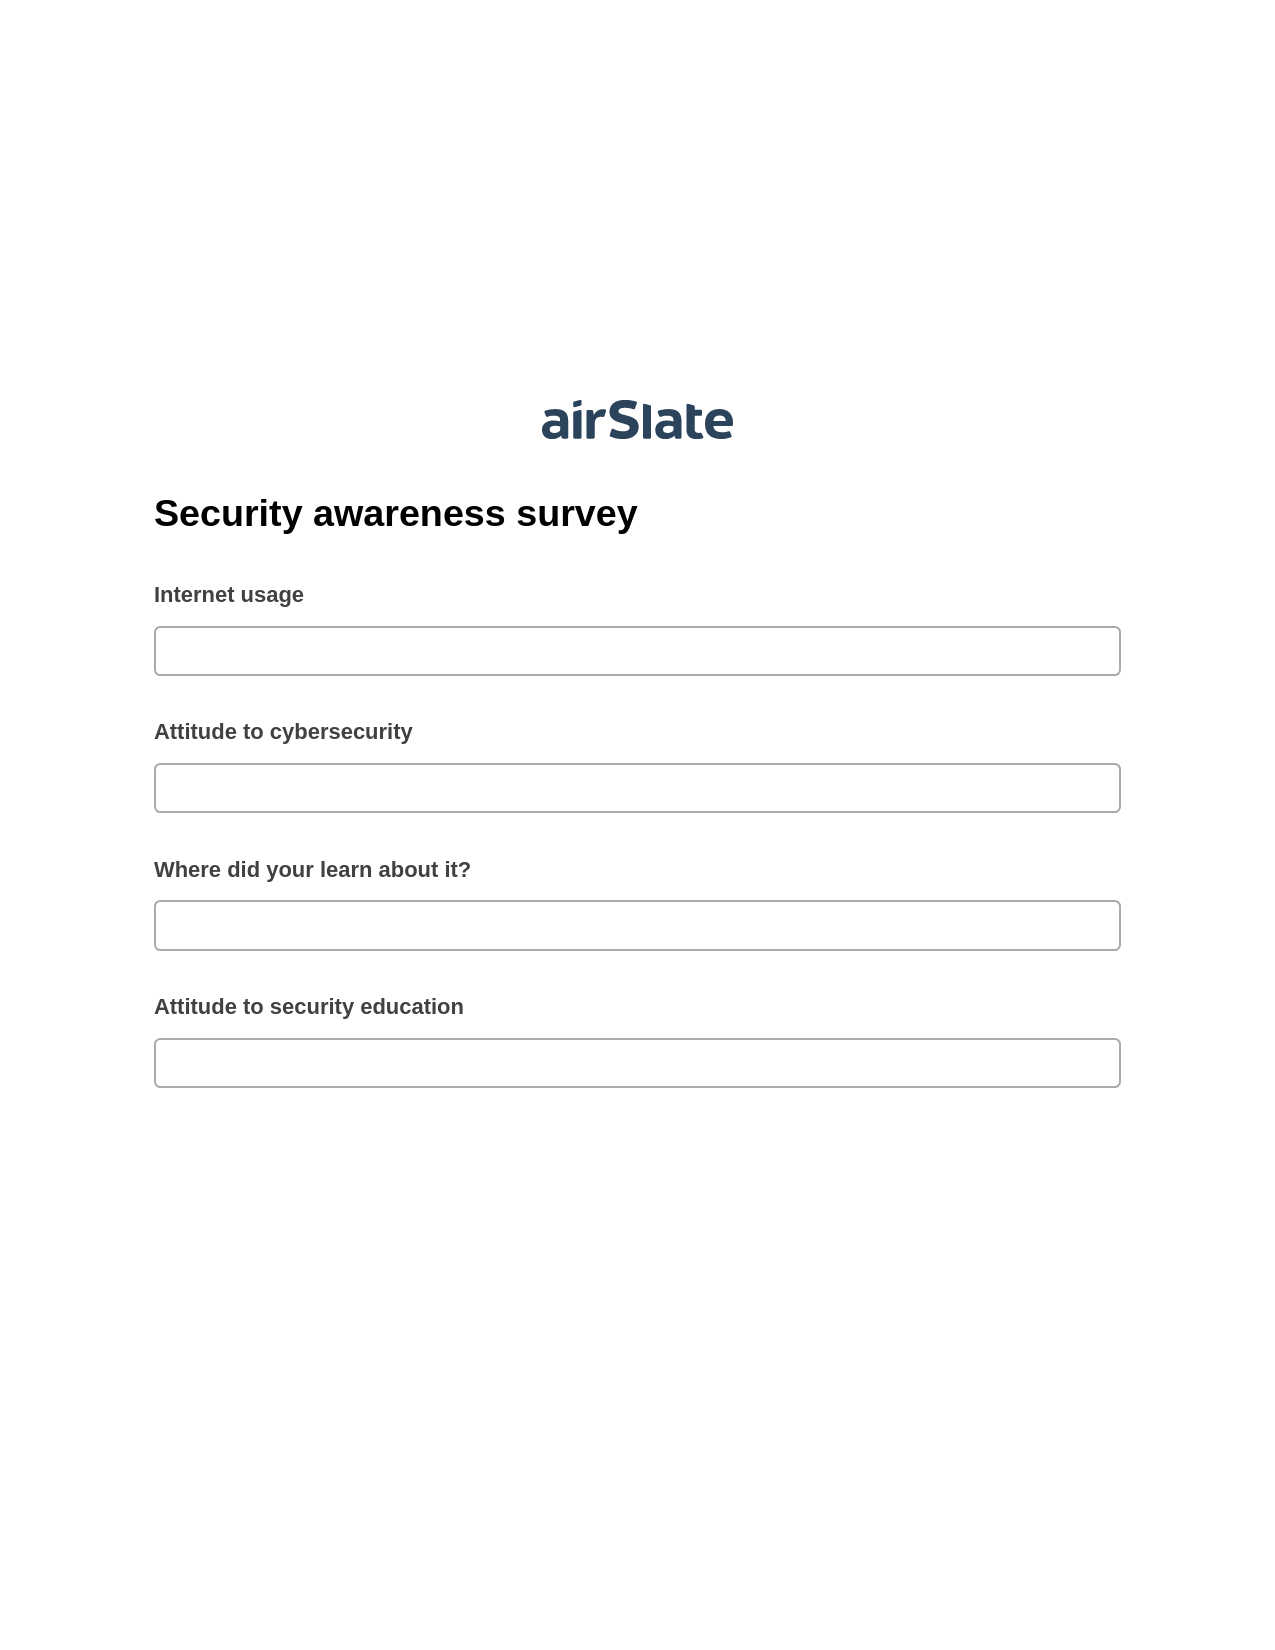 Security awareness survey Pre-fill from another Slate Bot, Email Notification Bot, Webhook Postfinish Bot